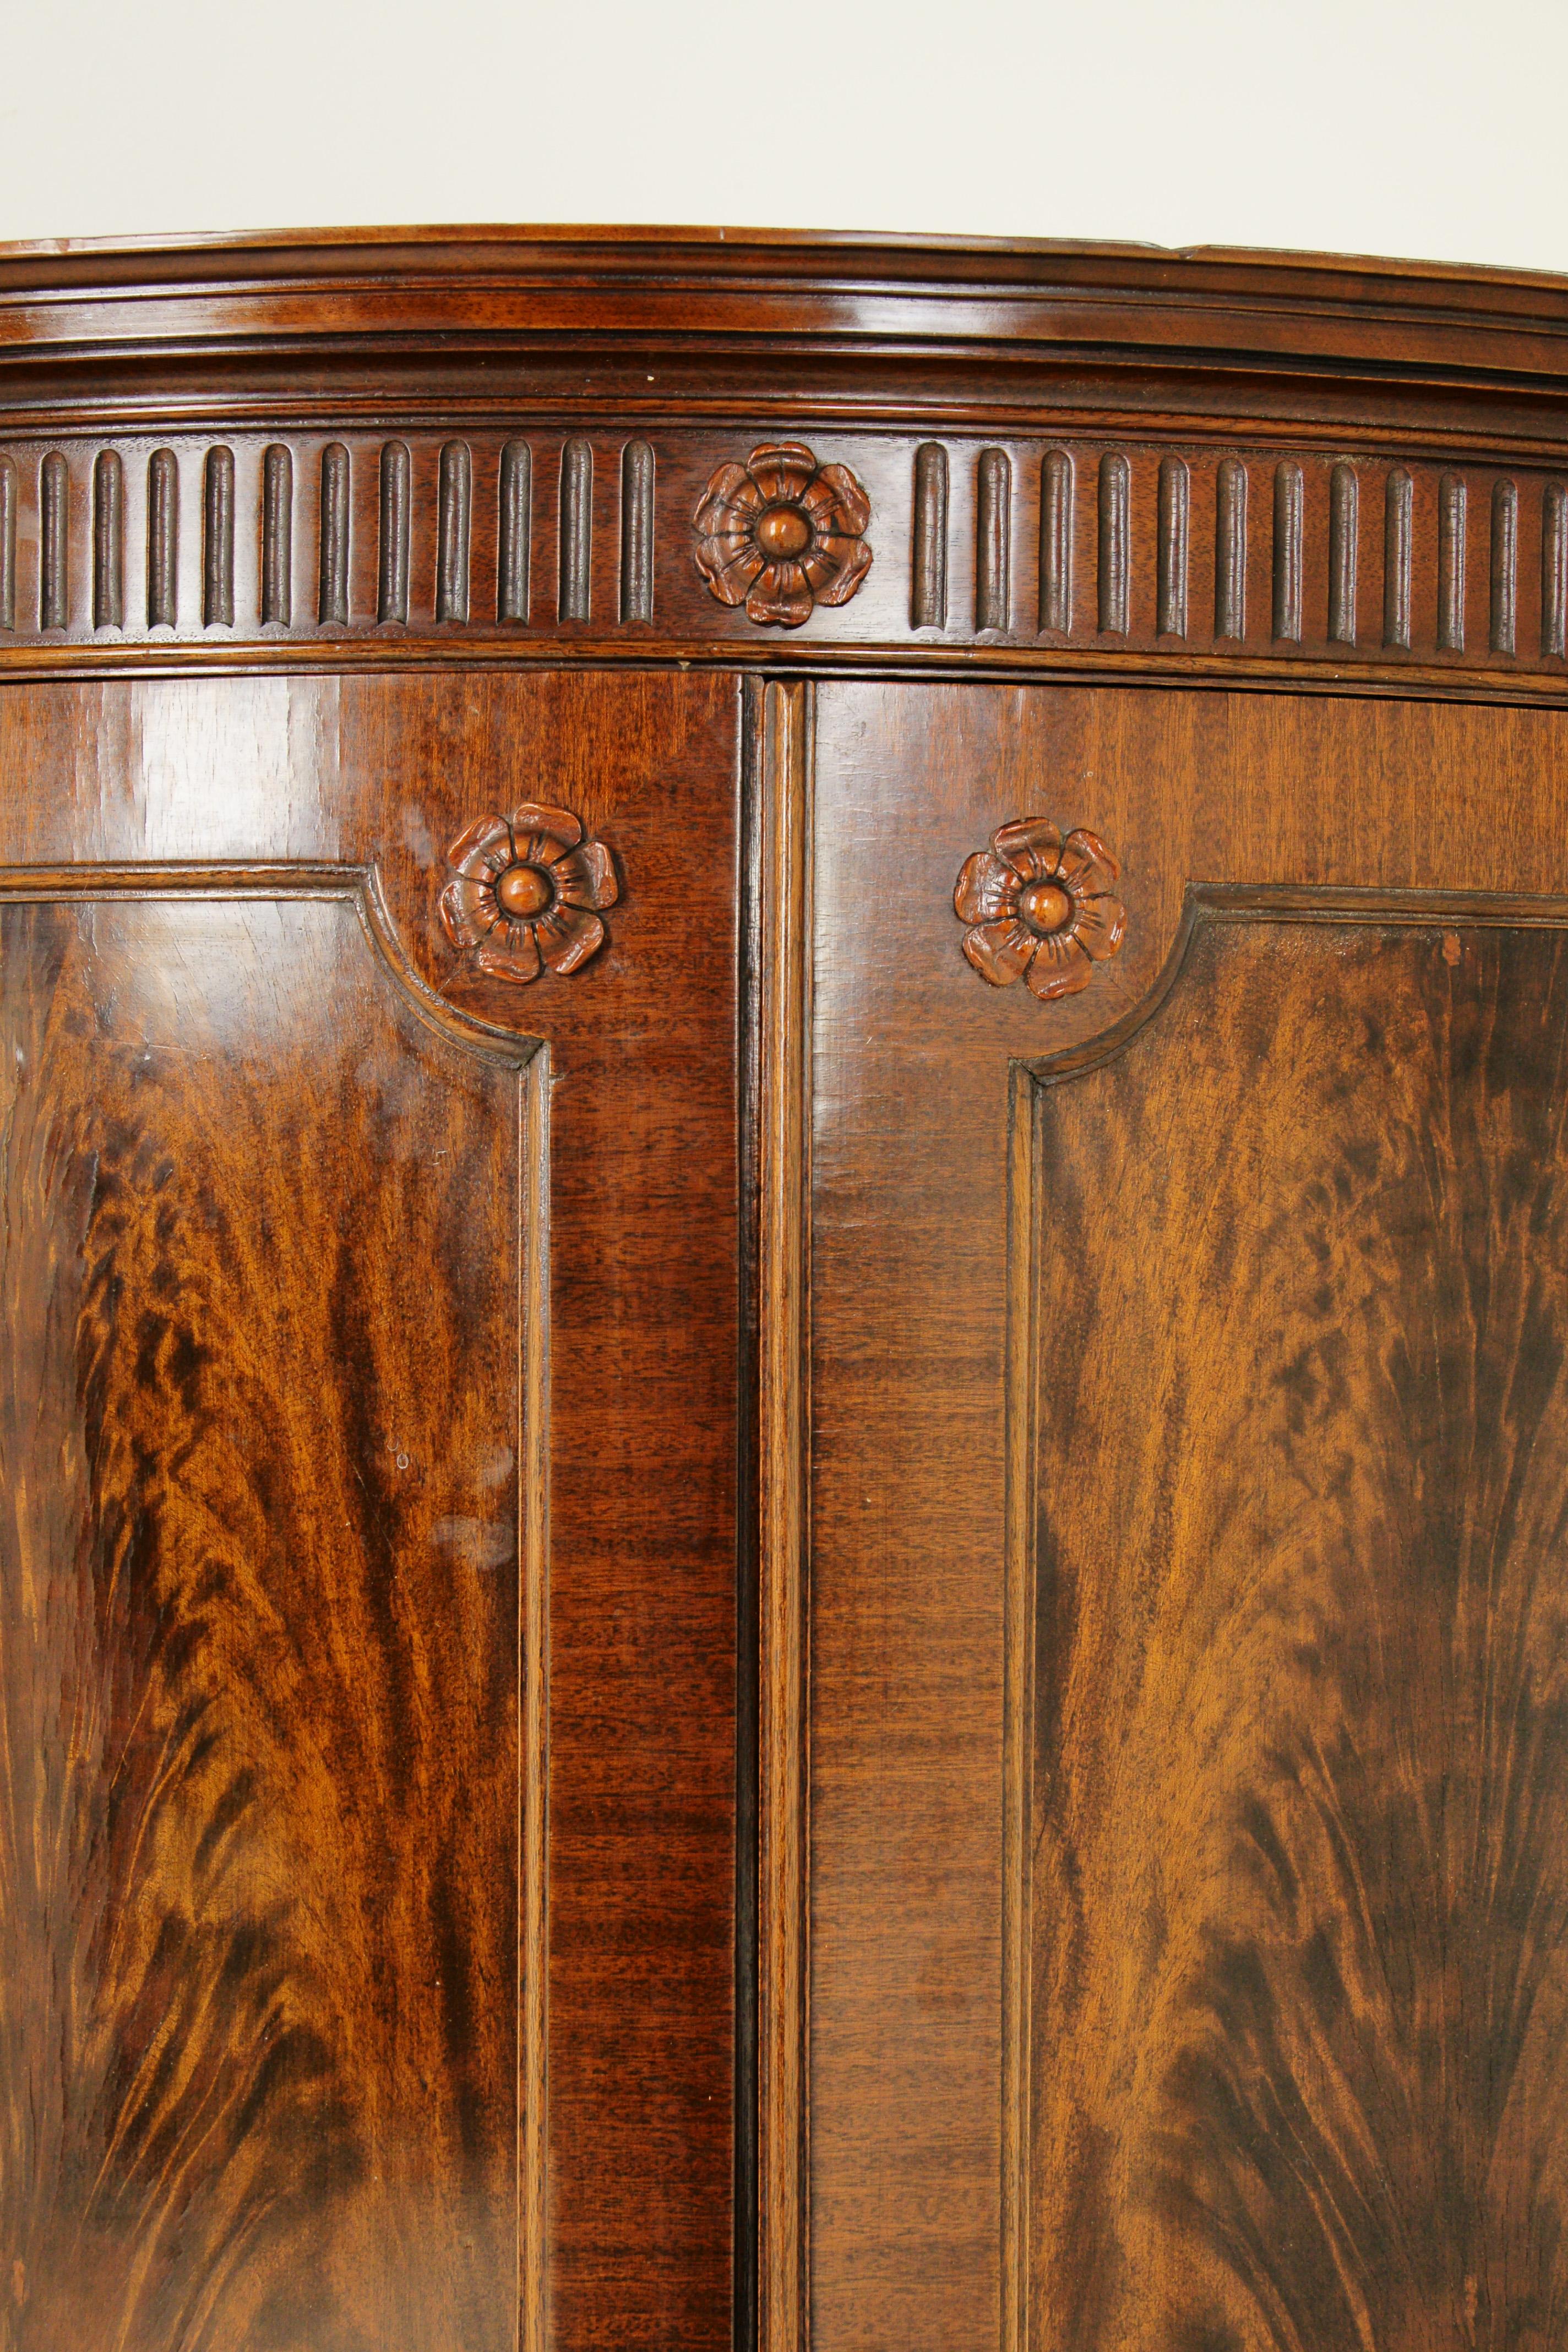 Hand-Crafted Antique Corner Cabinet, Entryway Decor, Carved Cabinet, Scotland 1880, B1457